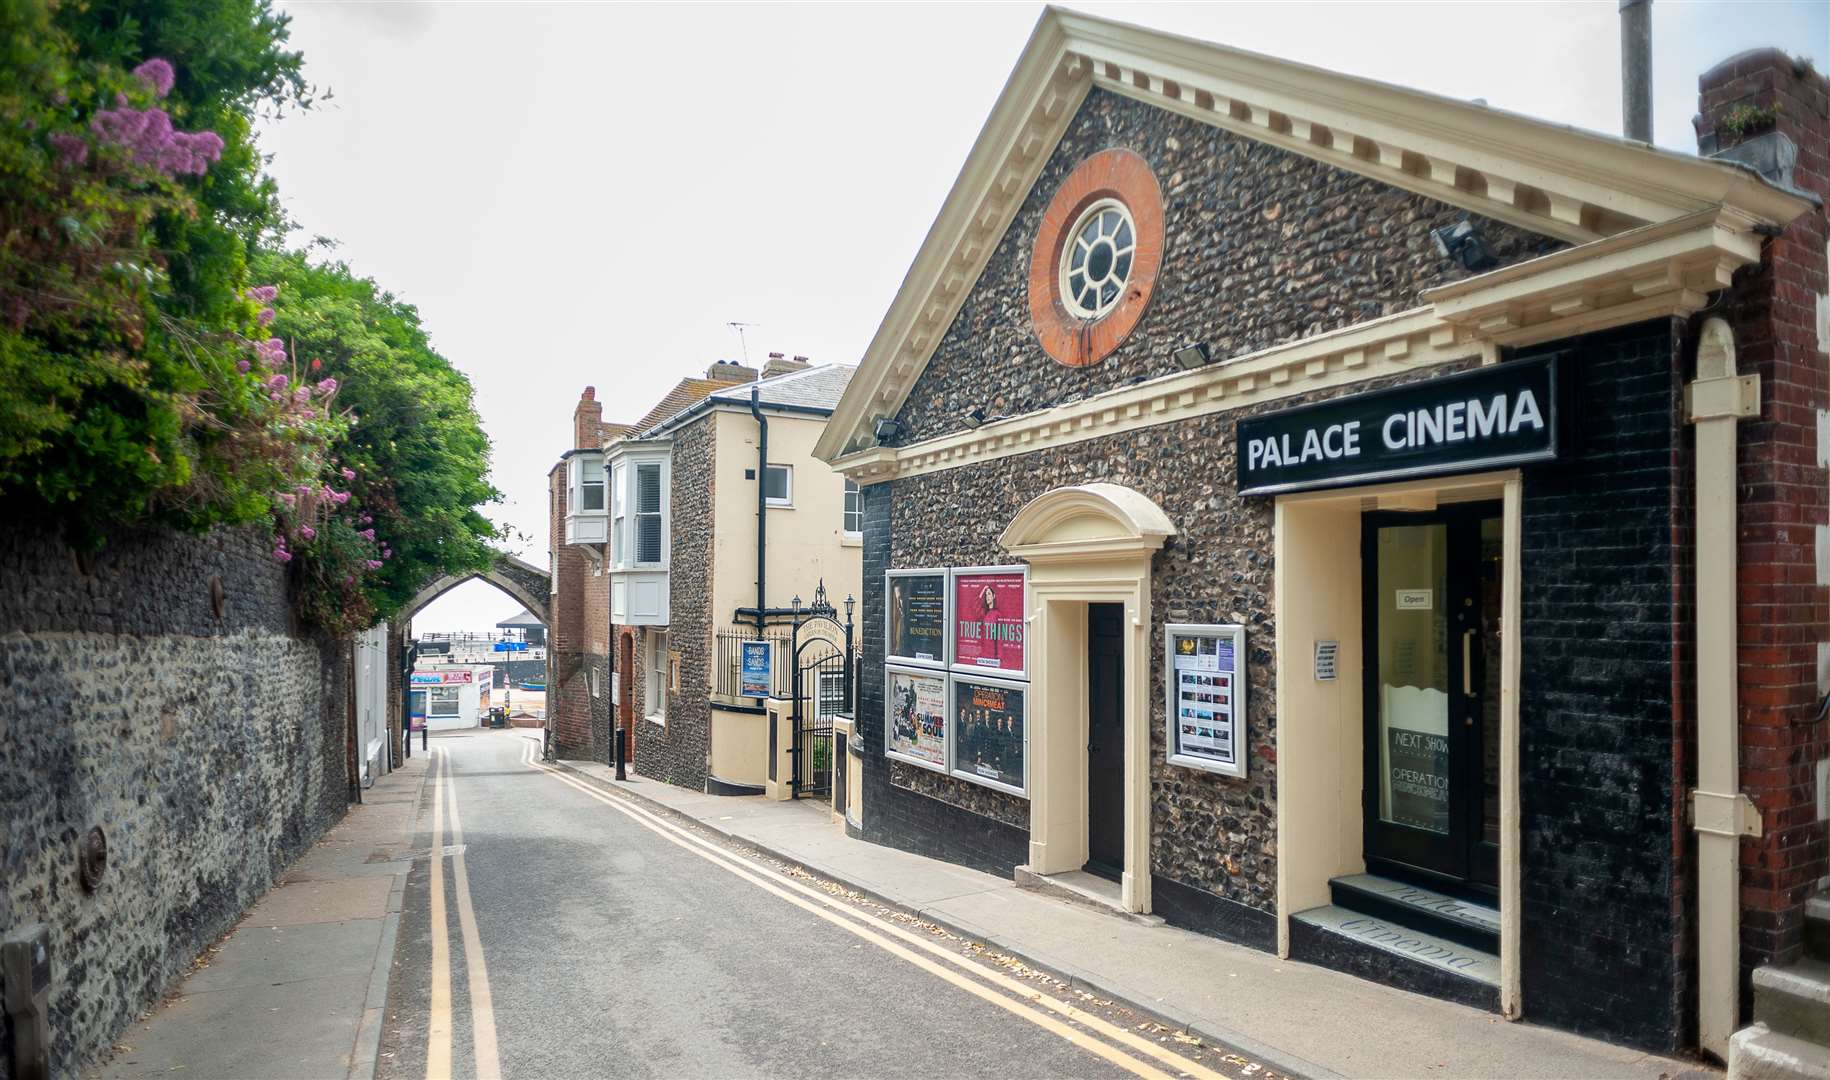 Palace Cinema is one of the oldest operating cinemas in Kent. Picture: Peter Davin